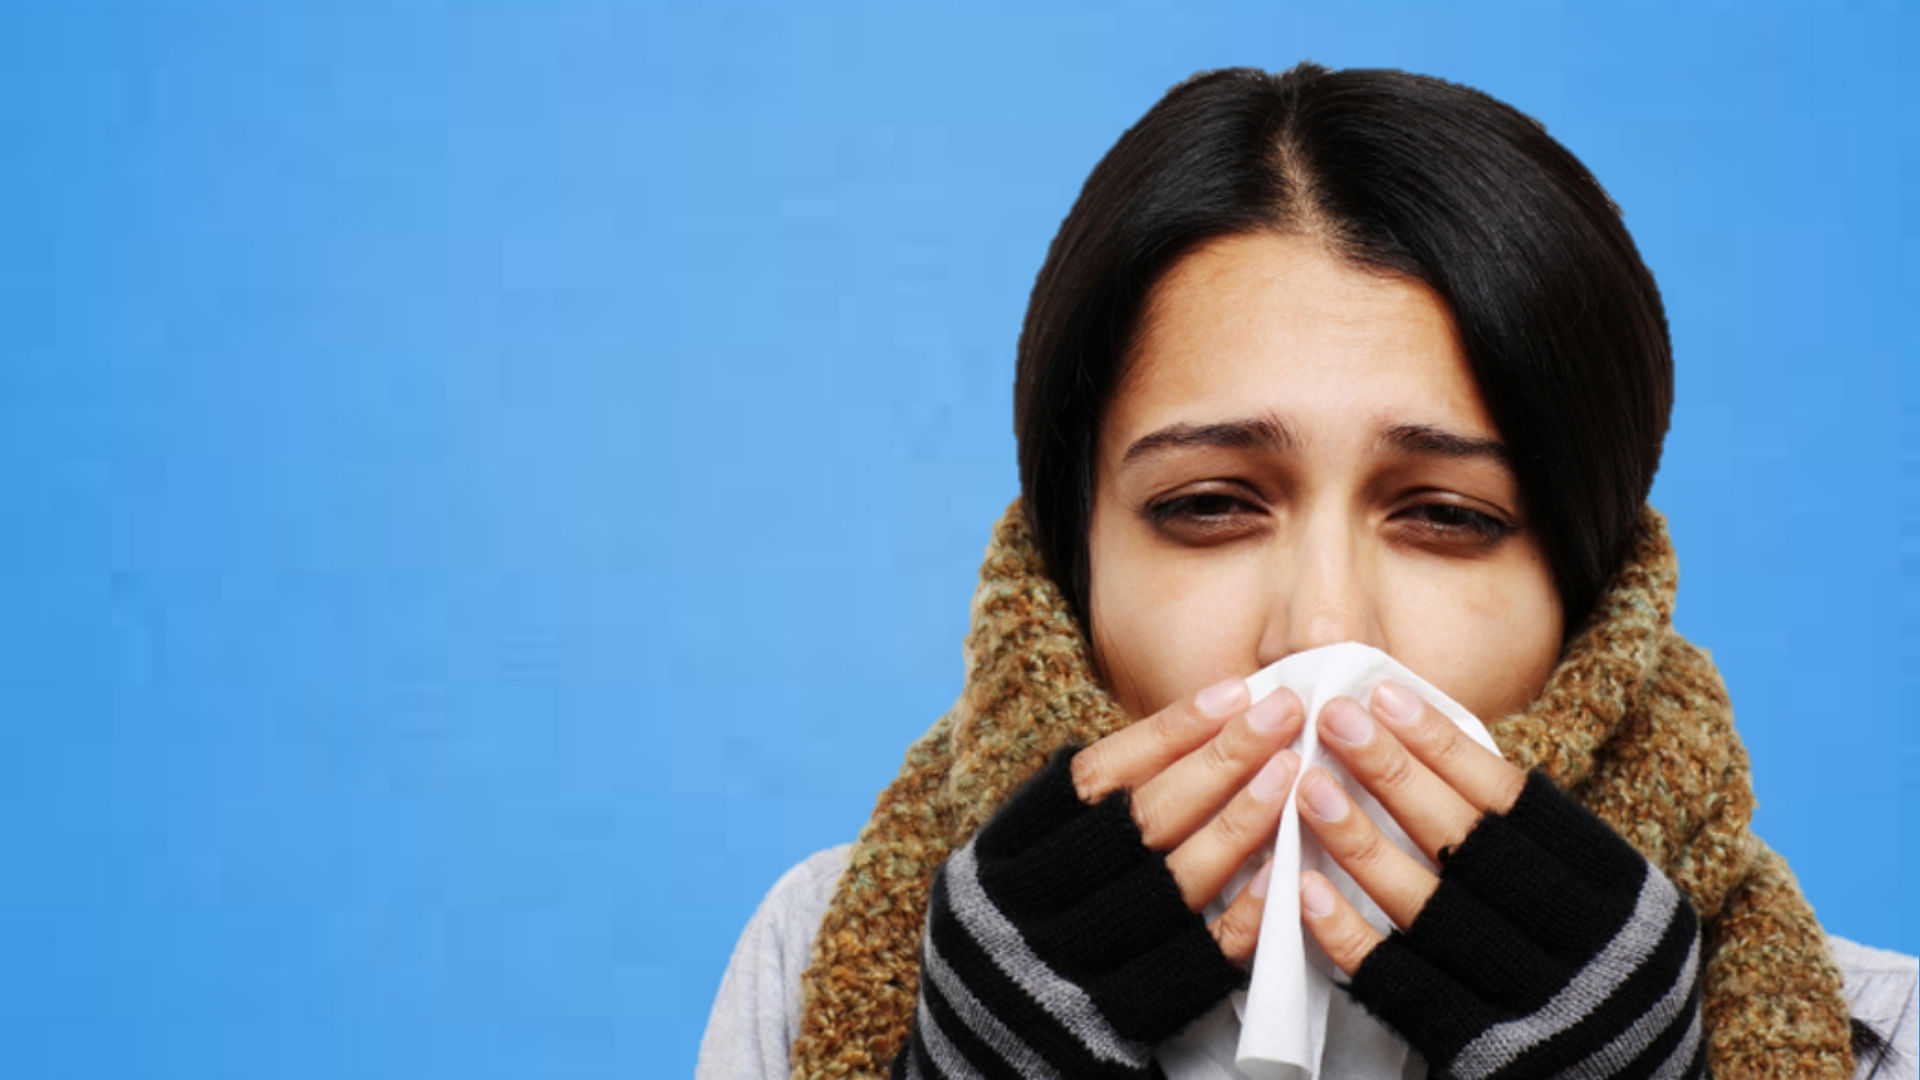 Antibiotics can leave the lung vulnerable to flu viruses, leading to significantly worse infections and symptoms.